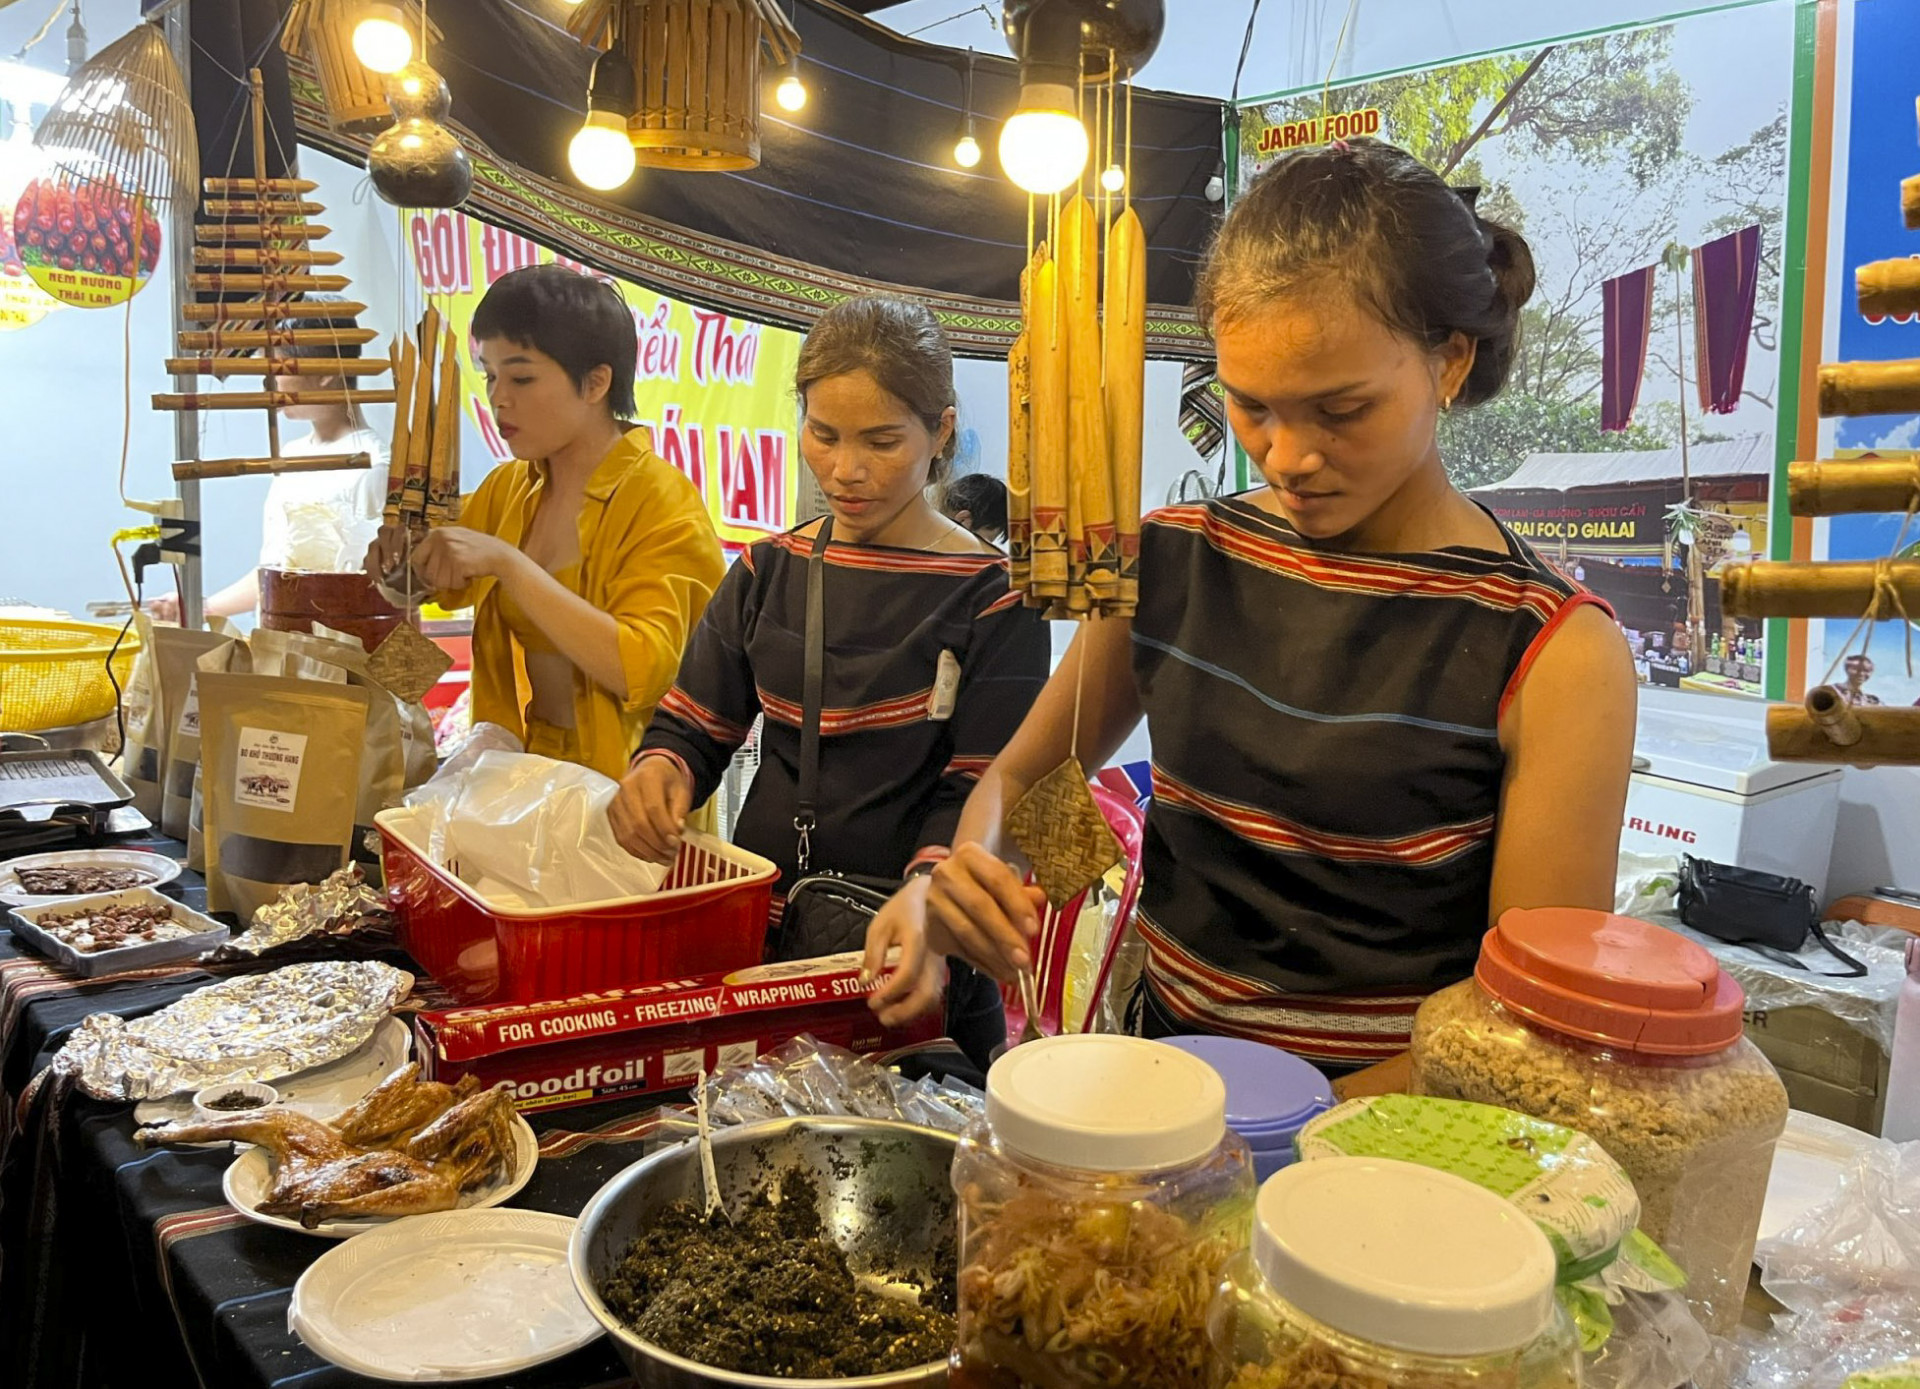 Food stalls of Gia Lai Province